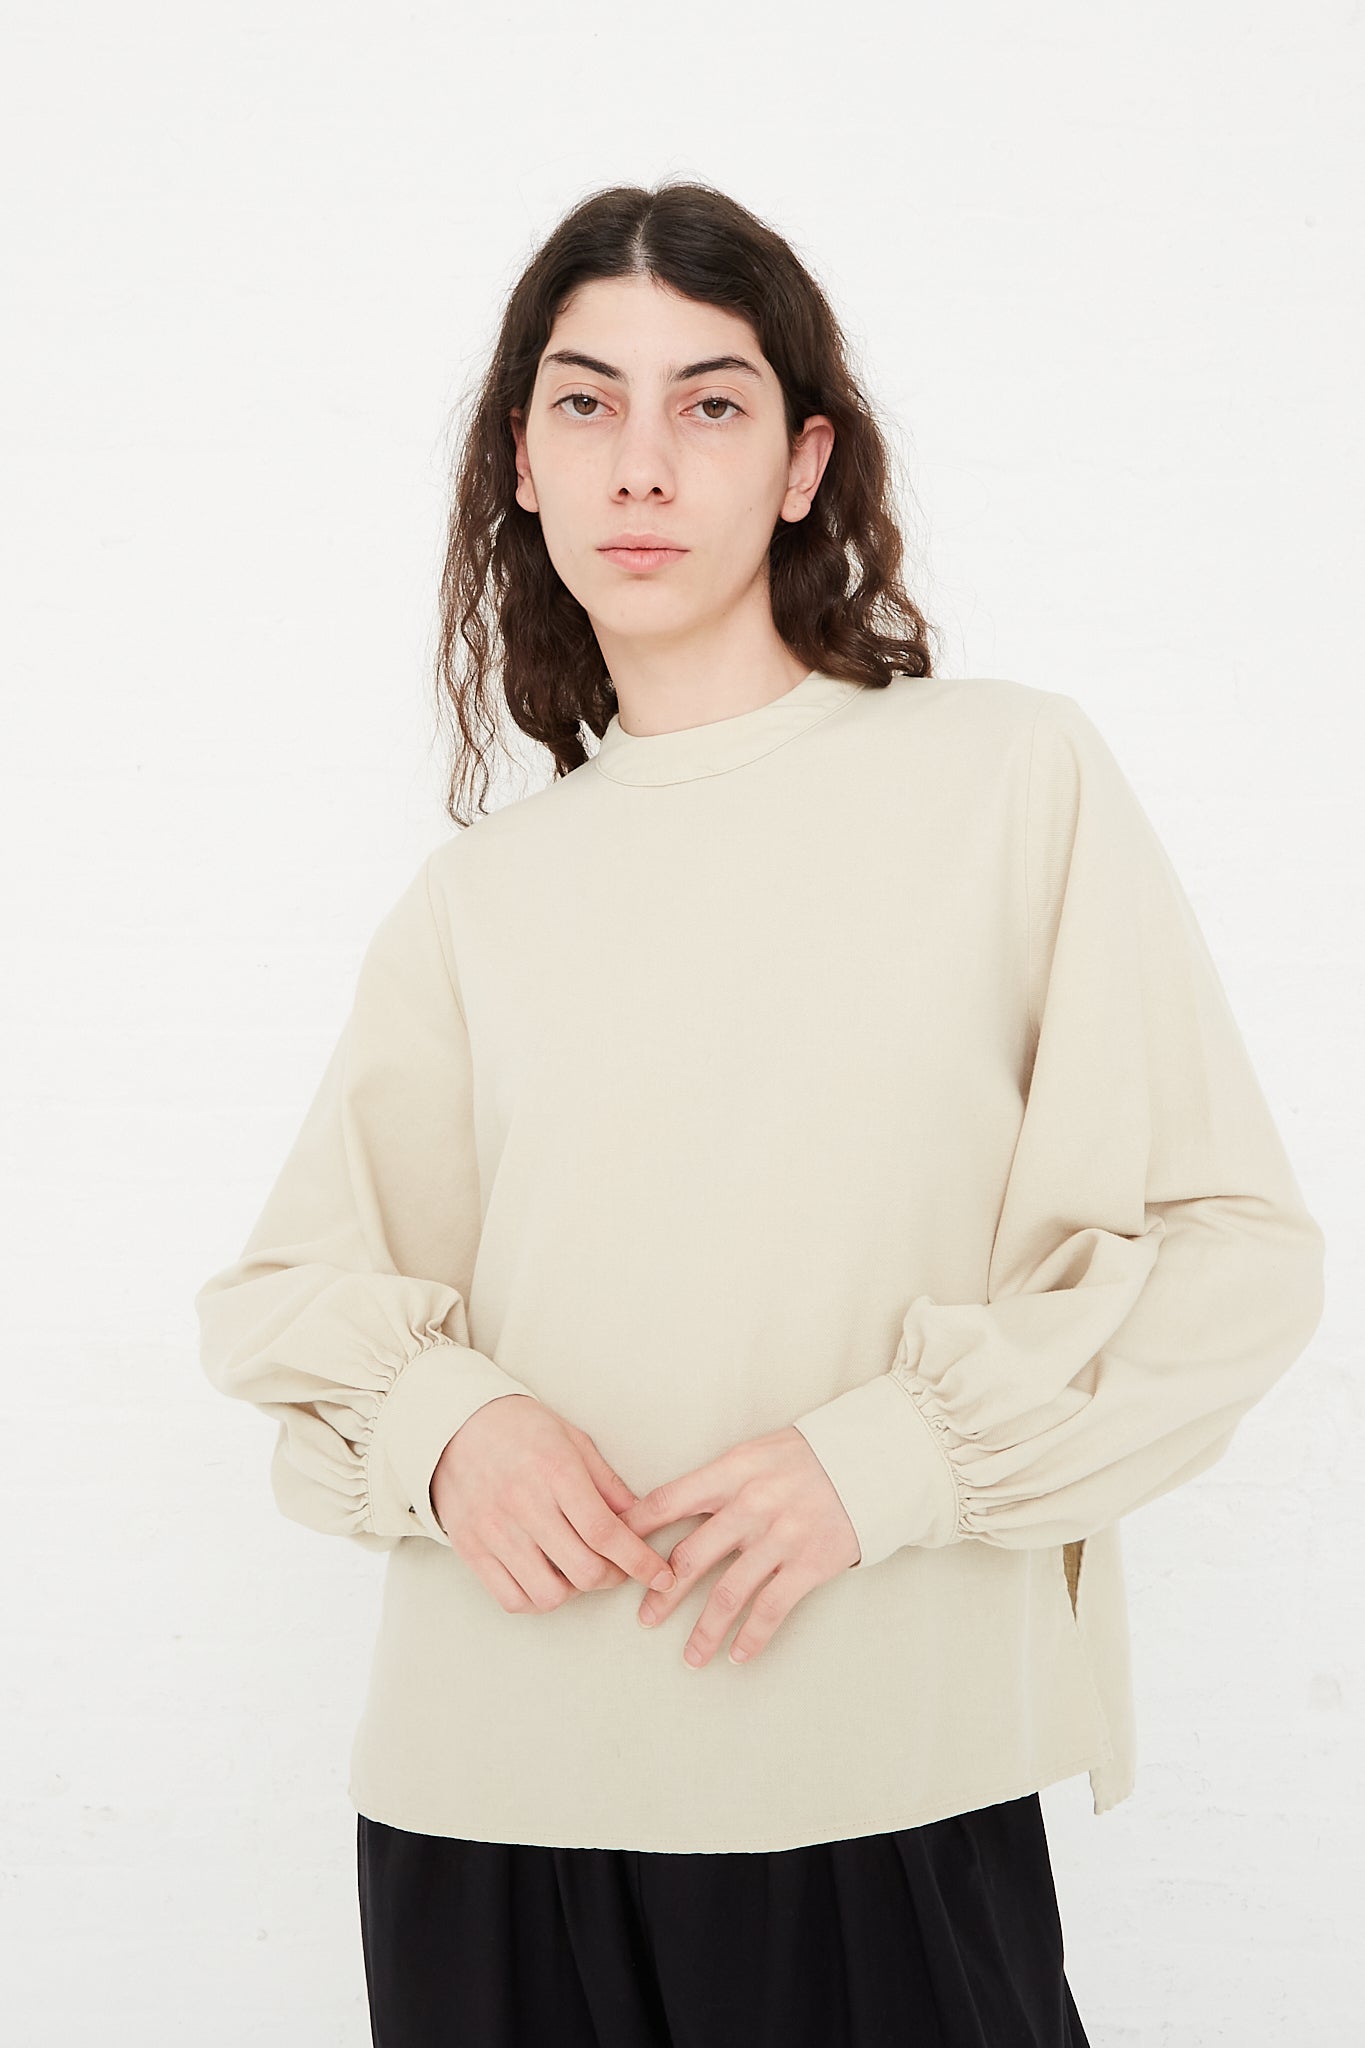 Turtleneck blouse with front slit and cuffed sleeves in beige